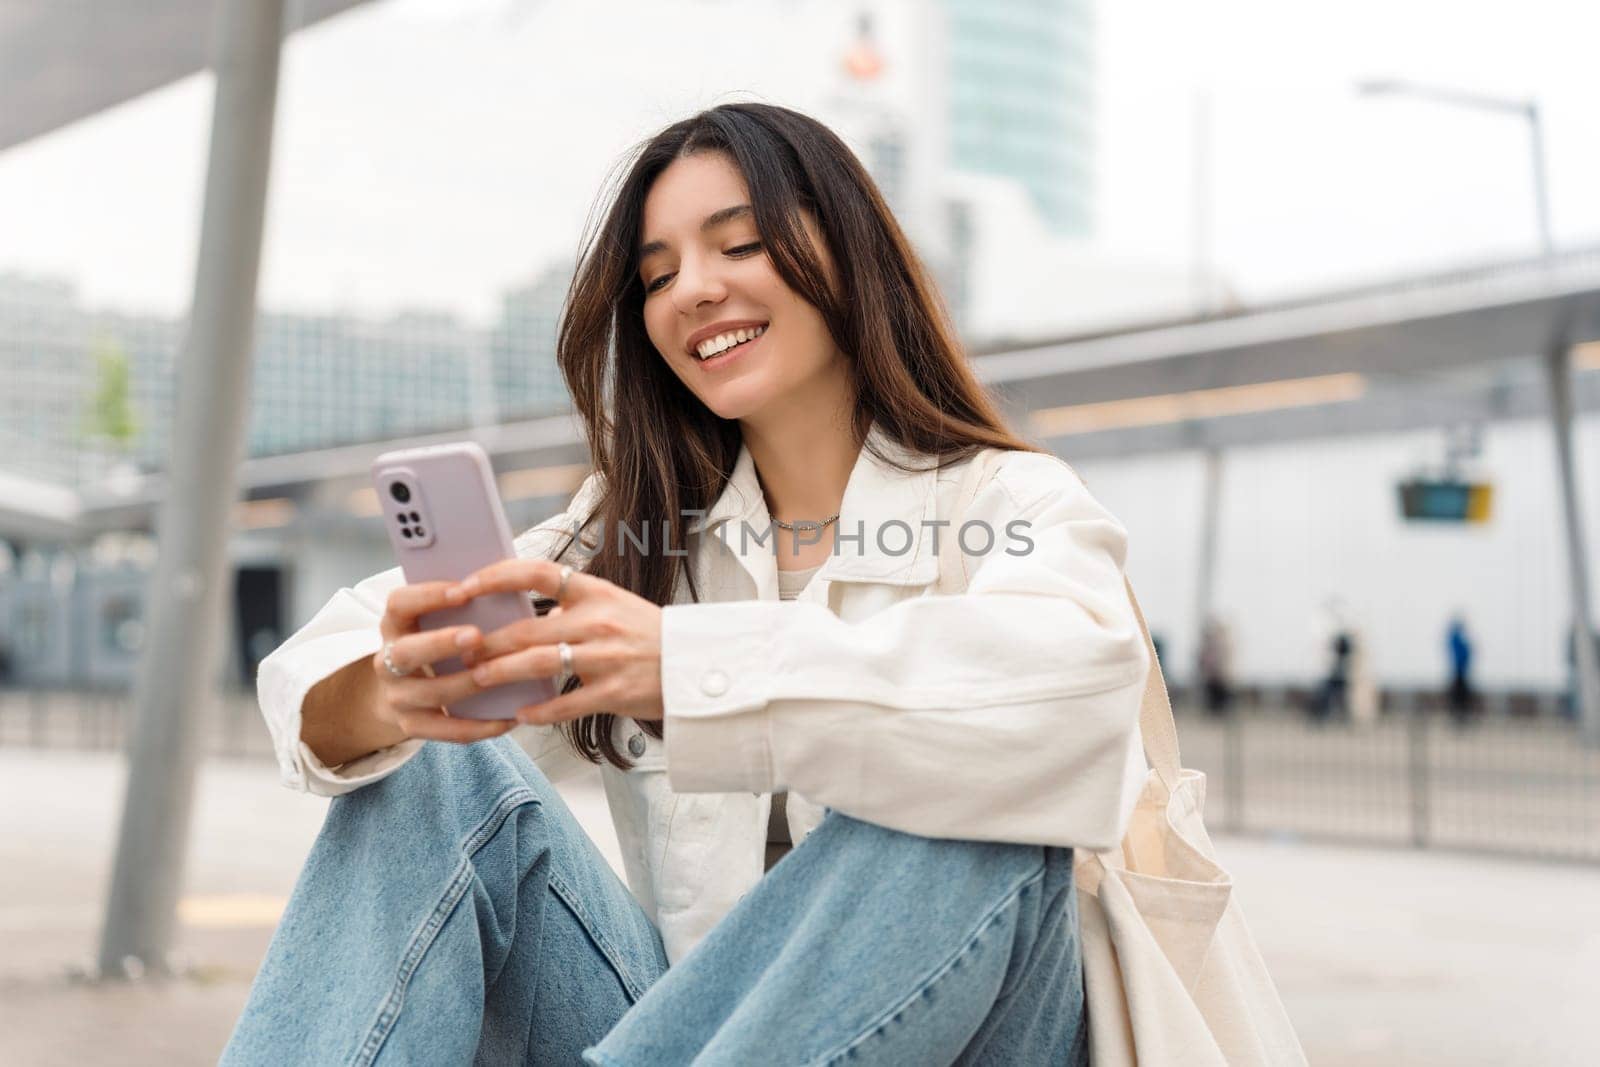 Bright and cheerful young woman with shopper on shoulder waiting public transport at station smiling beautifully while texting on phone by AndreiDavid